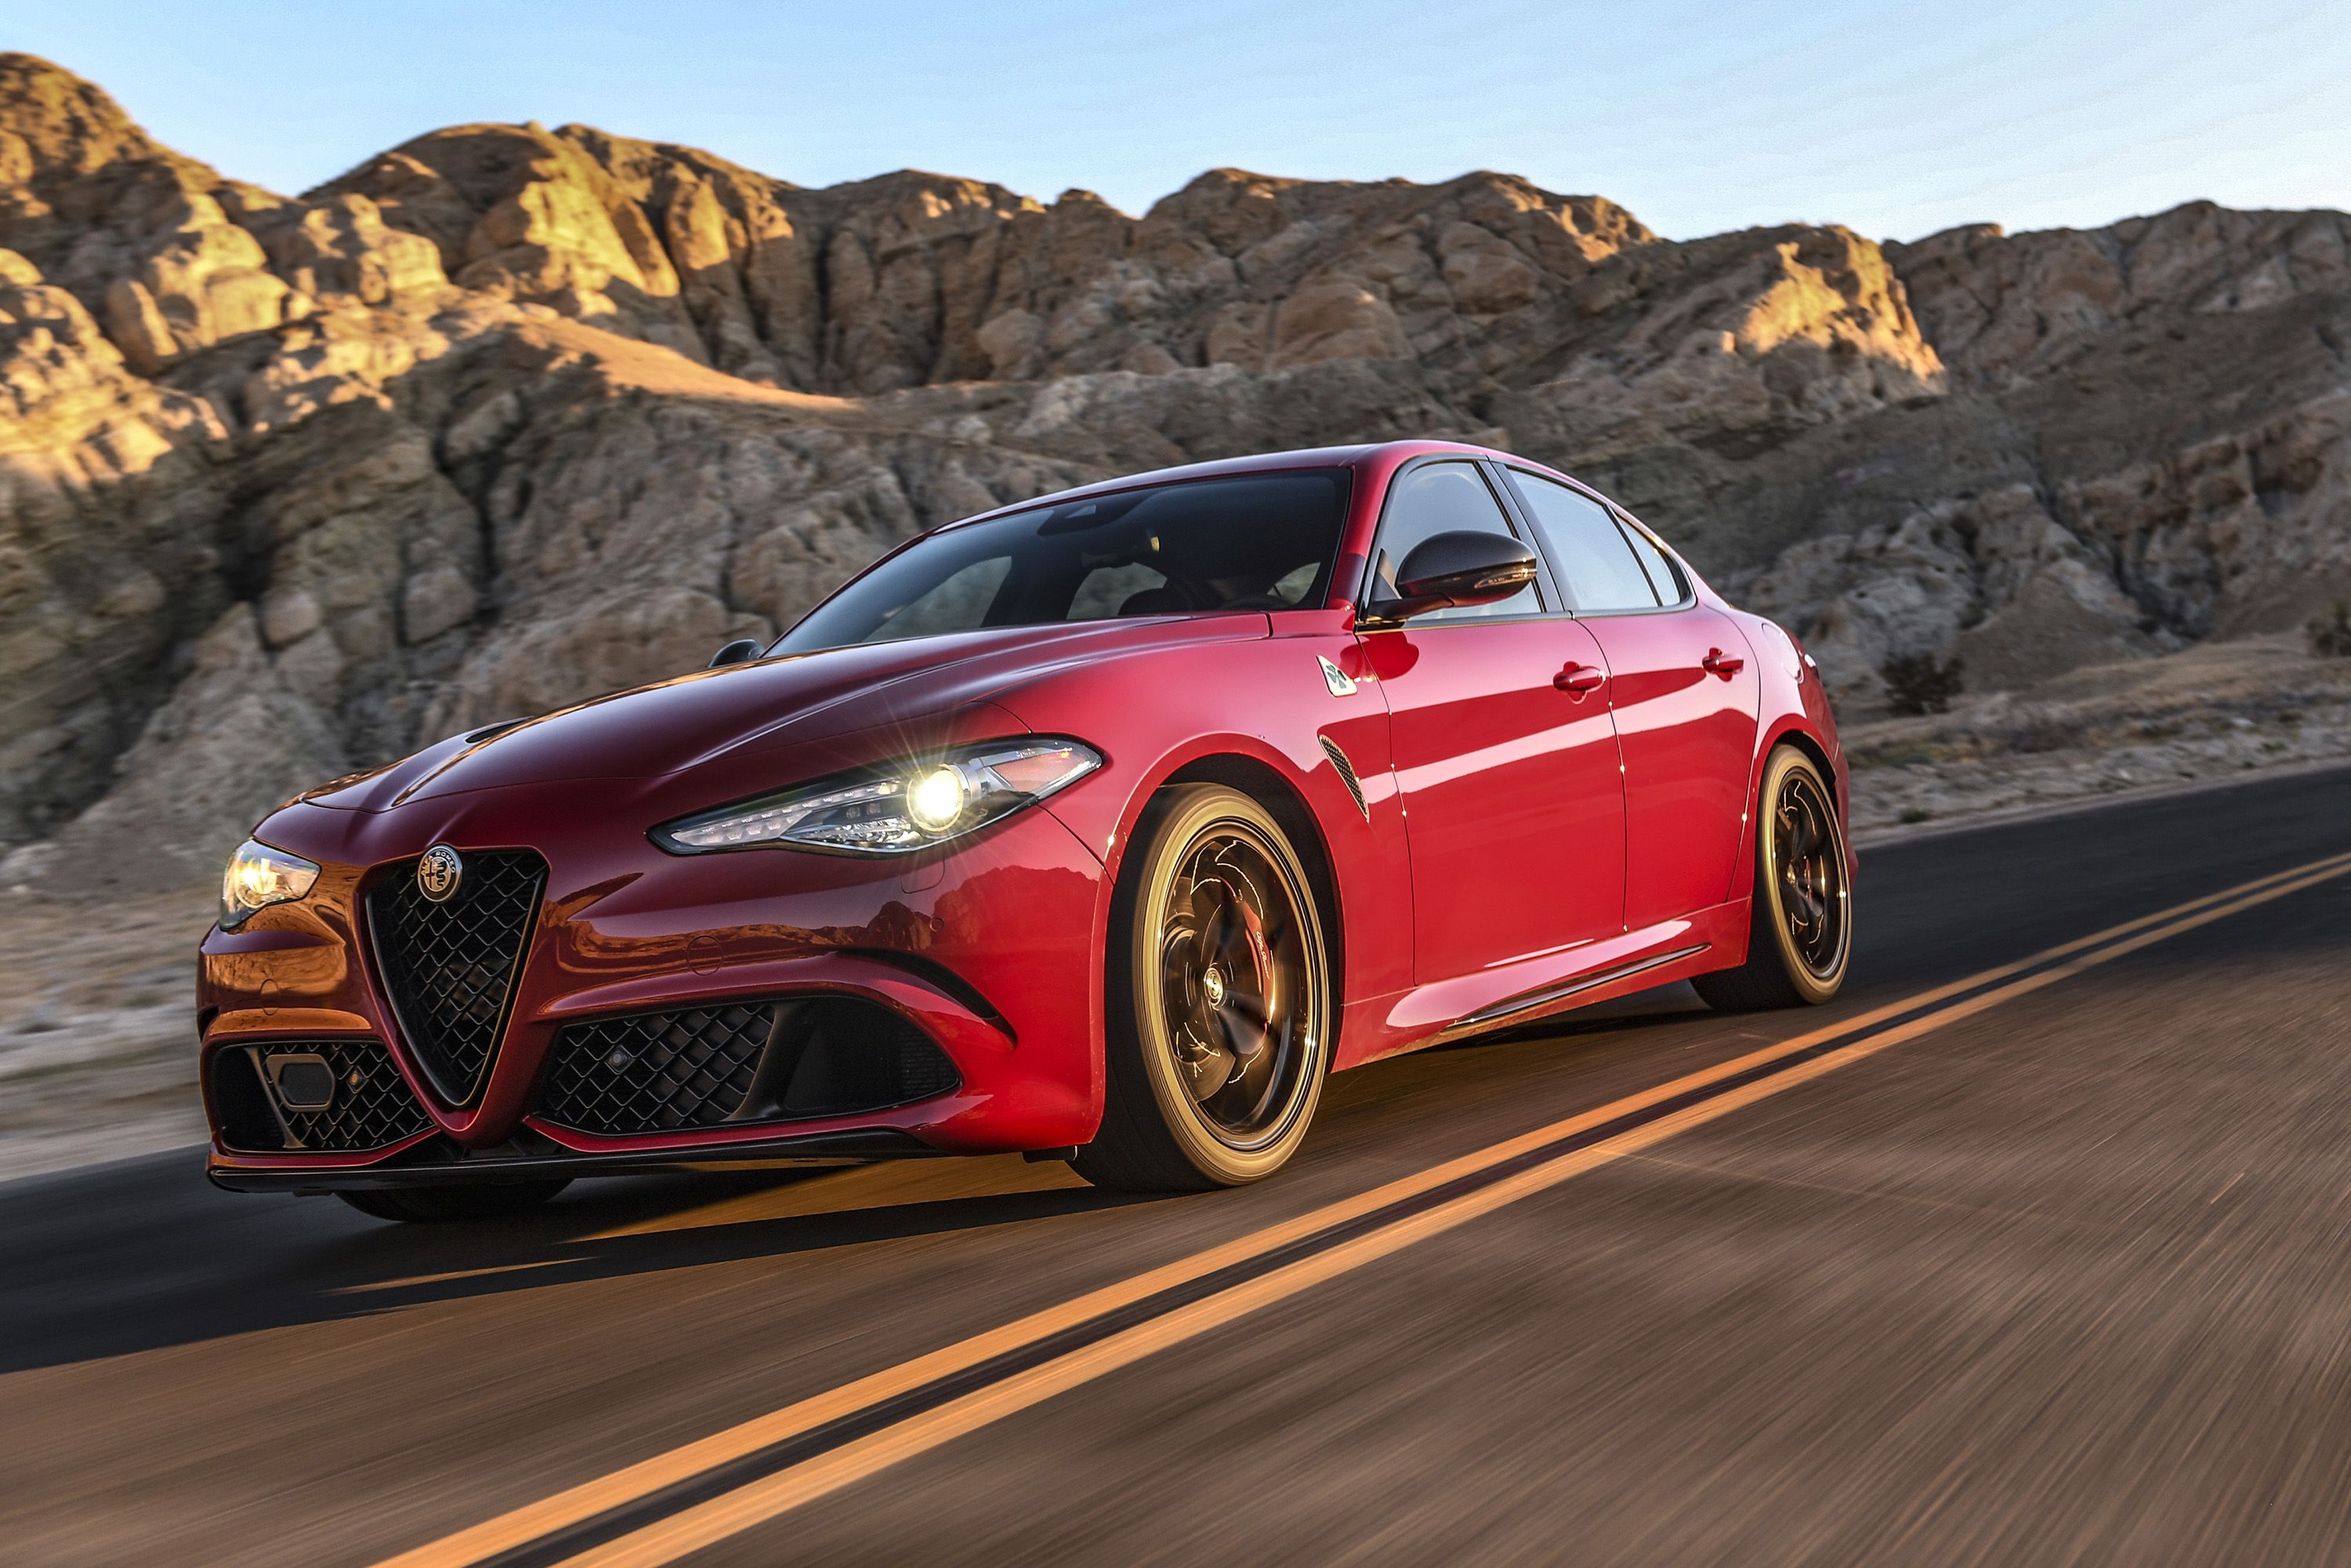 Alfa Romeo: Where It Came From, Where It's Going